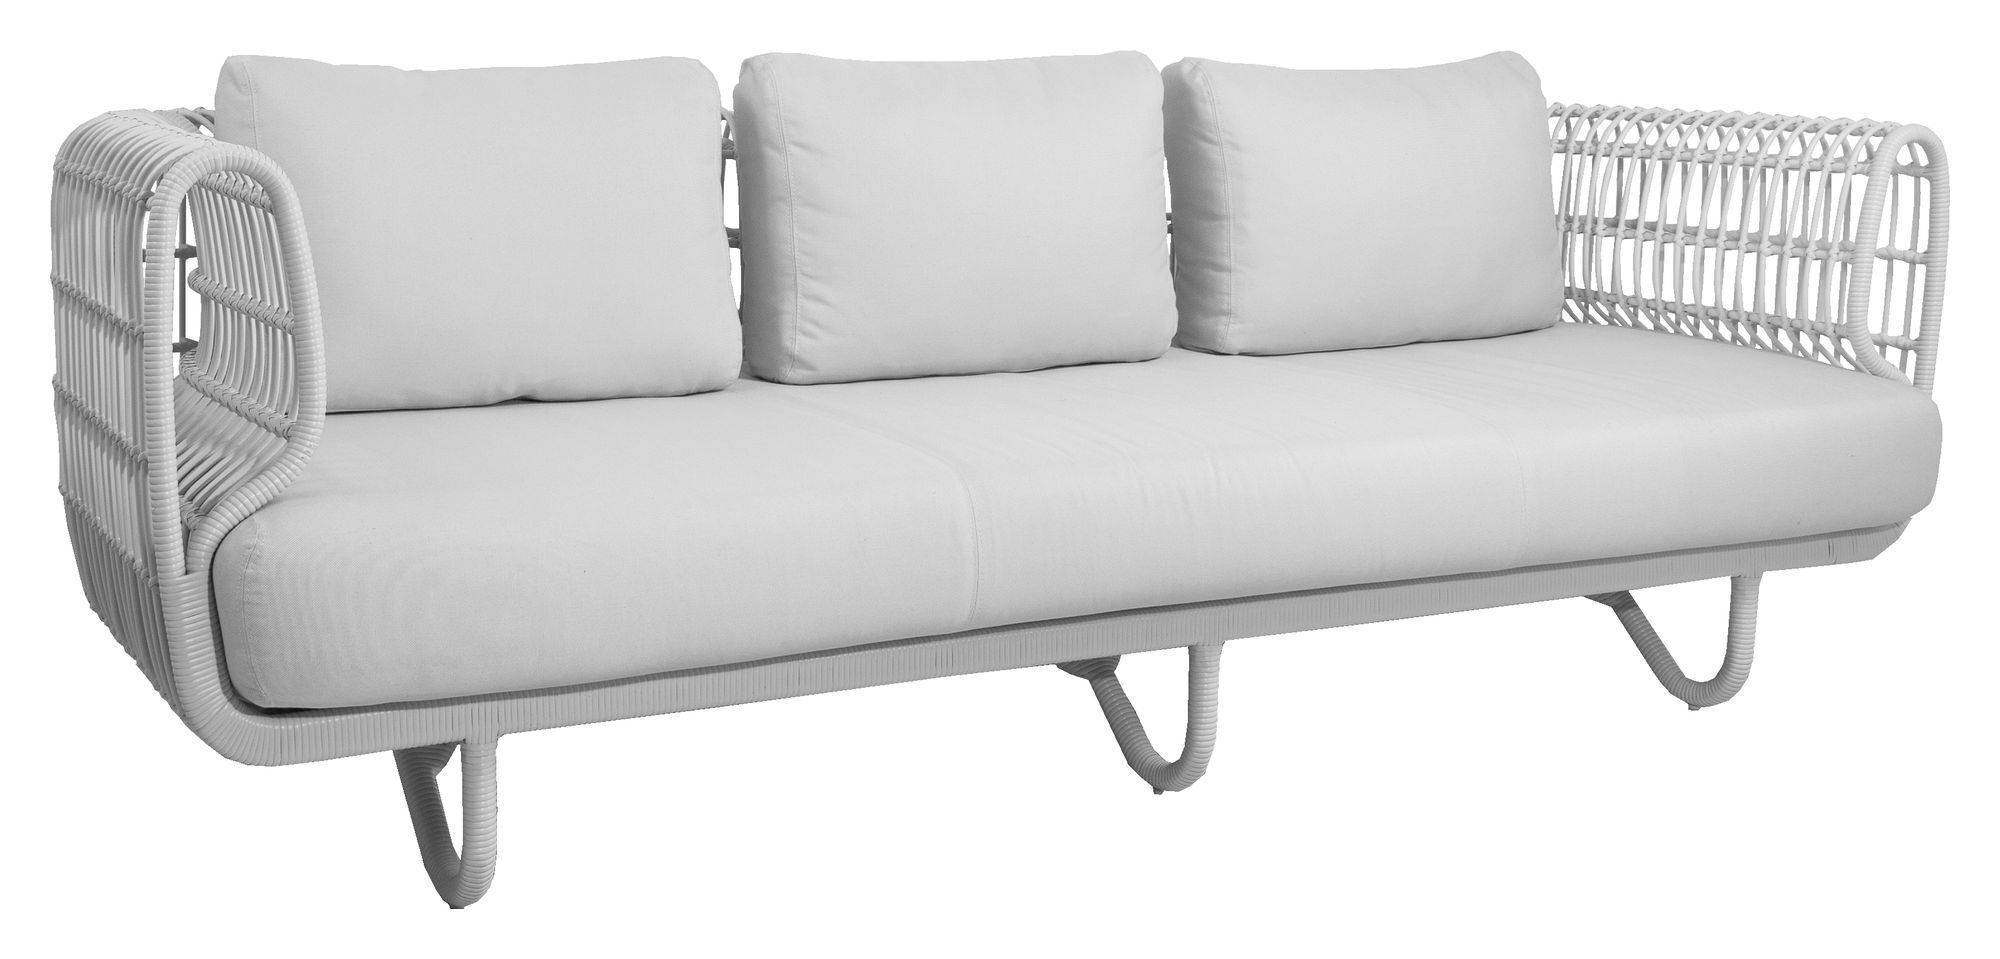 Cane-line OUTDOOR, Nest 3-pers. Loungesofa , Hvit, Cane-line Weave®   Unoliving